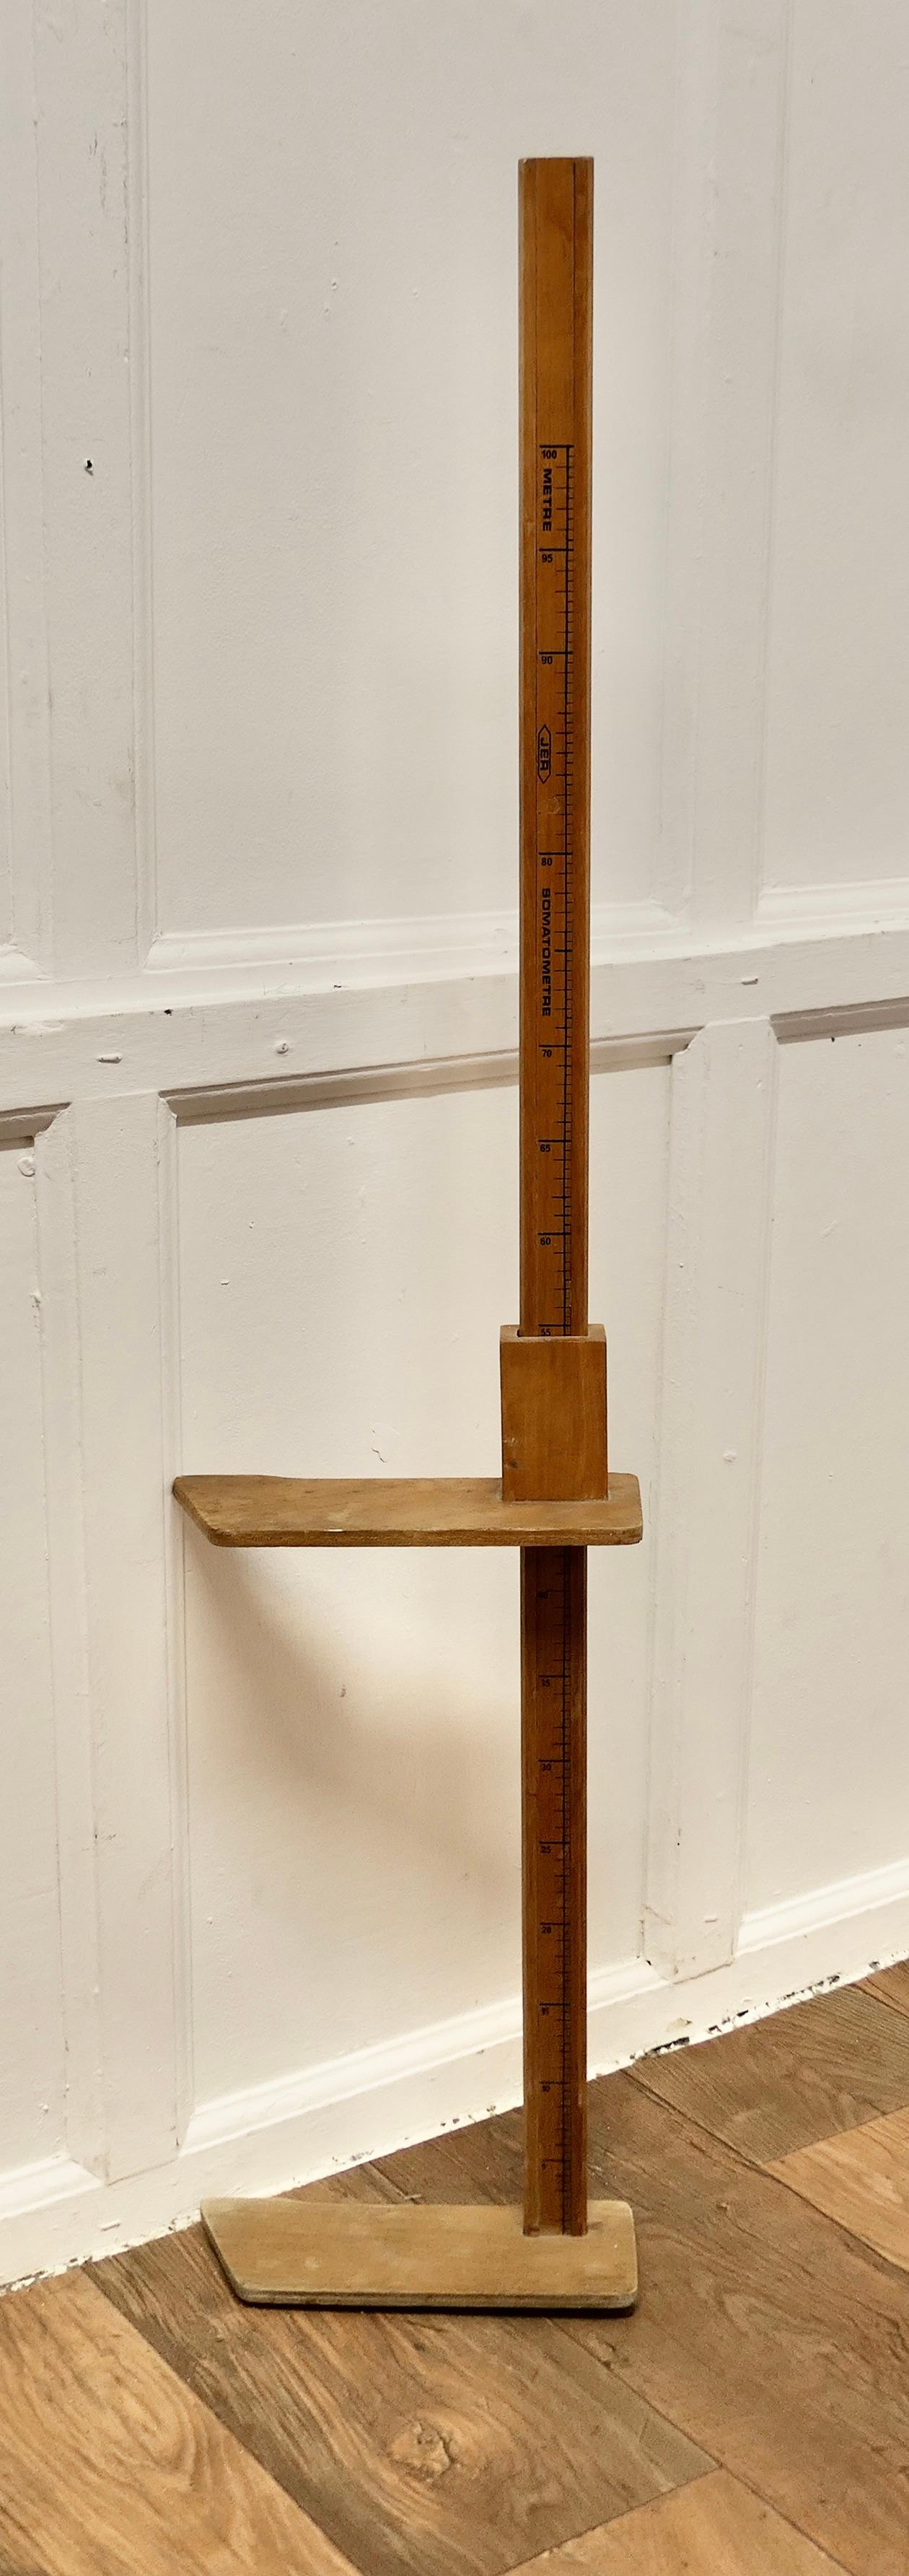 Pharmacy Child Measure Stand, Pitch Pine Measuring Stick or Somastometre

Once these along with scales were common place in Doctors Surgeries, Chemist Shops and Drug stores, the patient, the one here would have to be child as the measure only